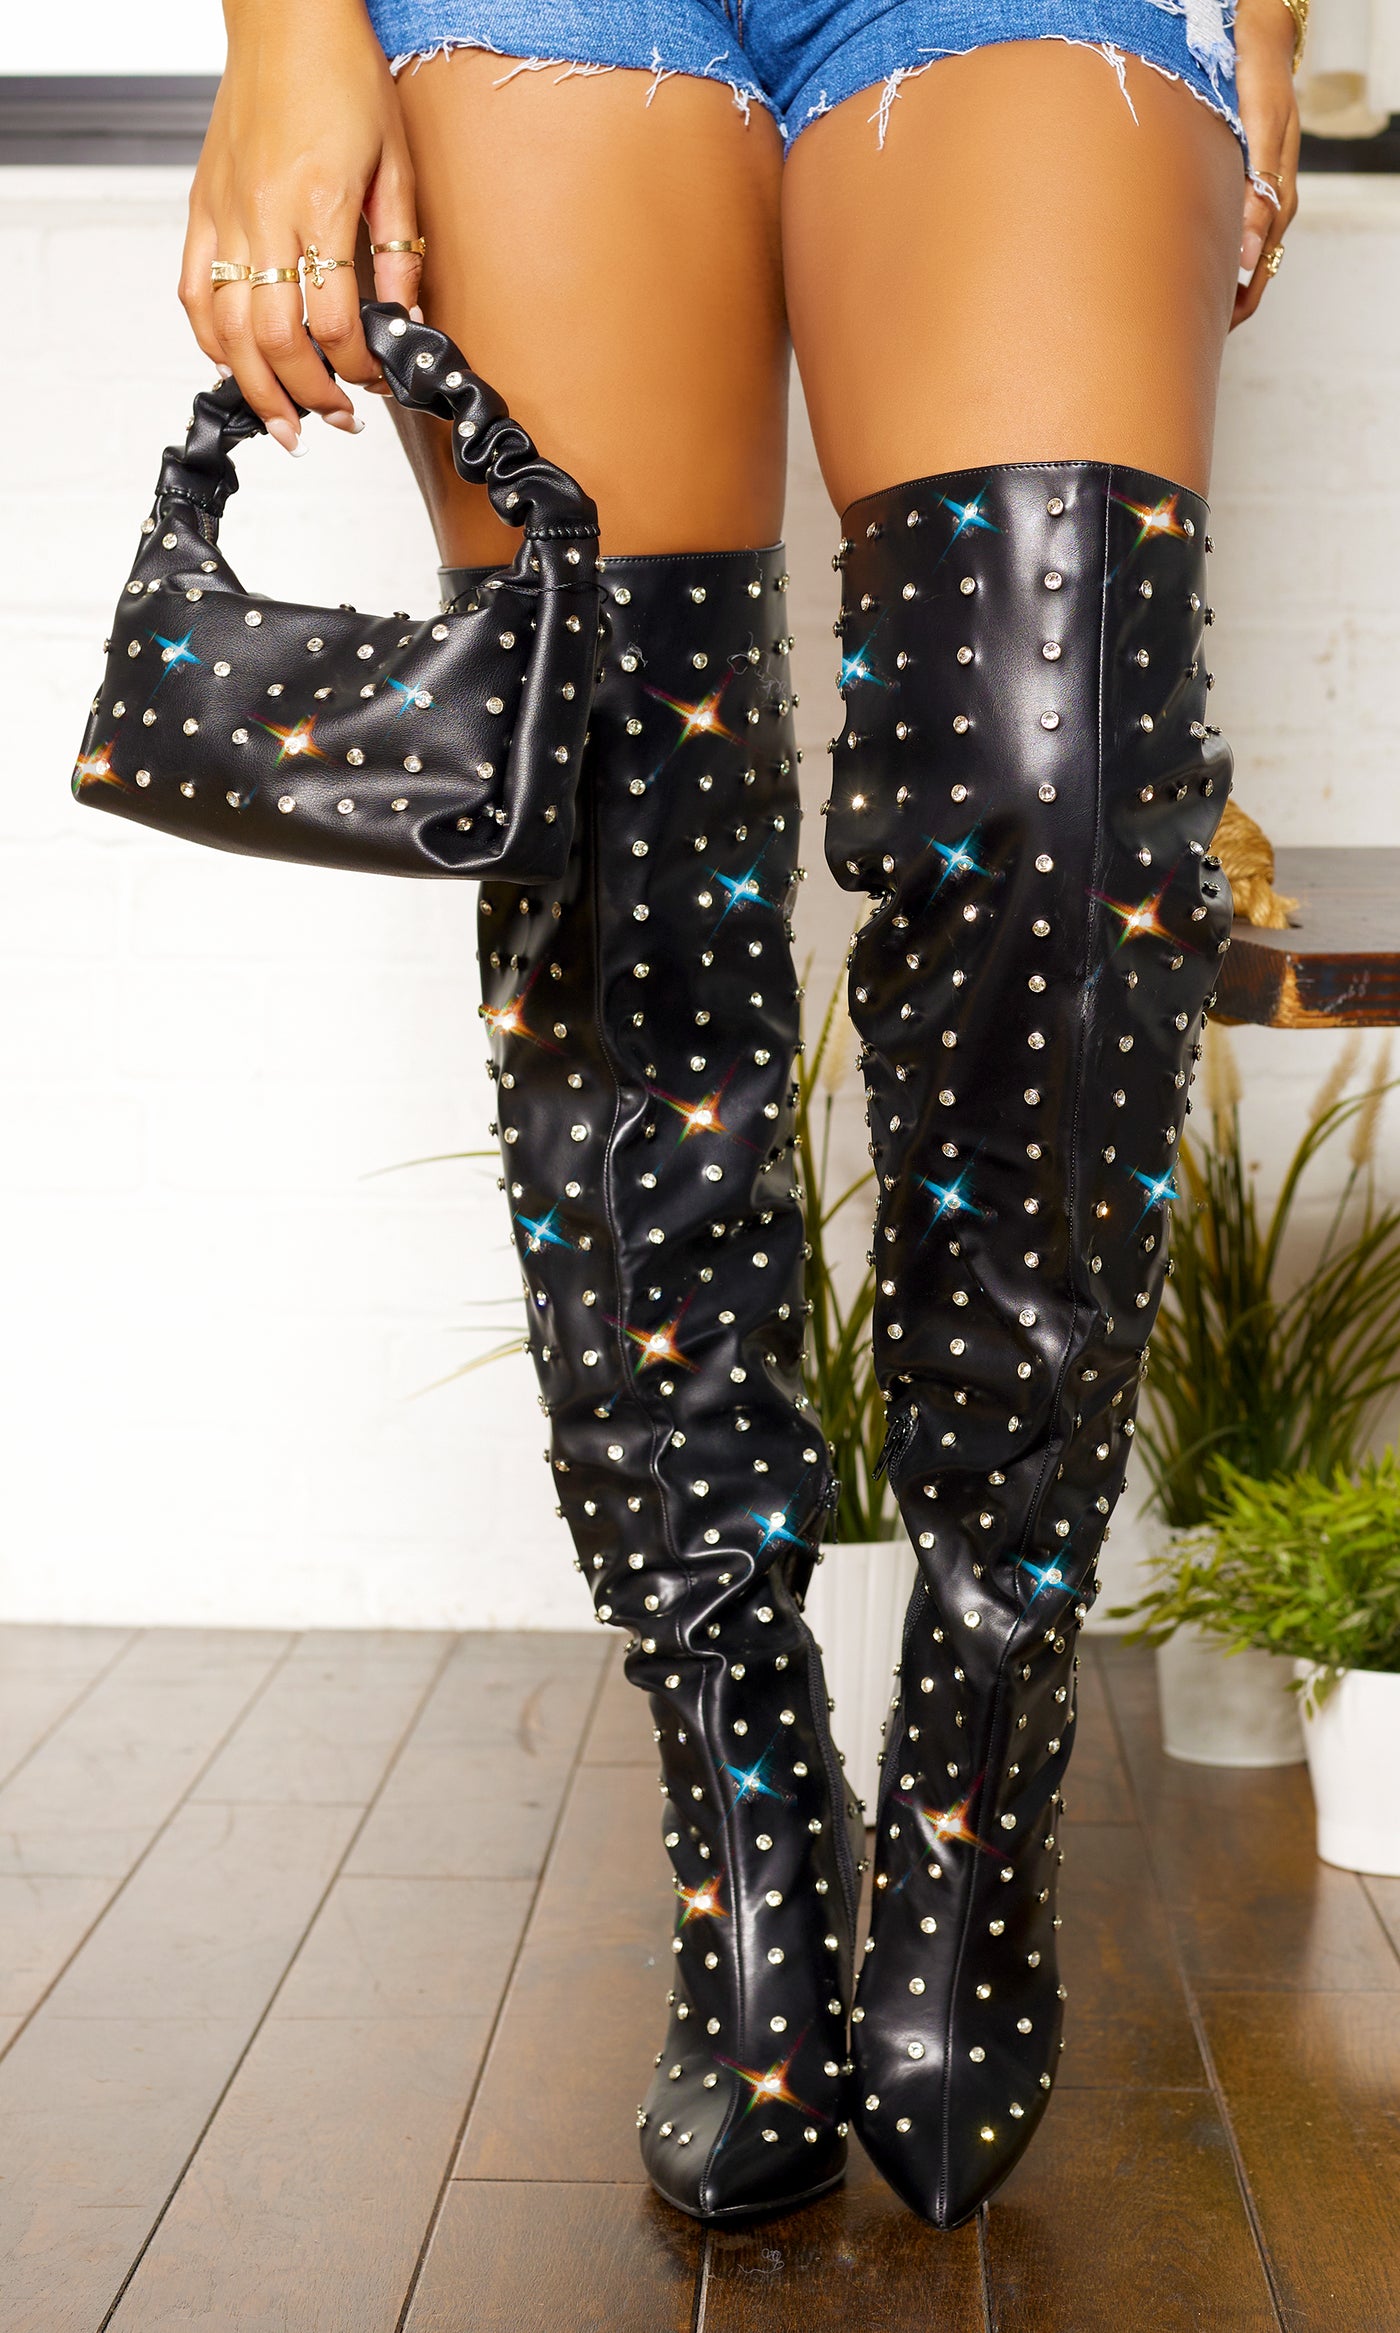 Girl's BFF | Studded Thigh High Boots - Black - Cutely Covered